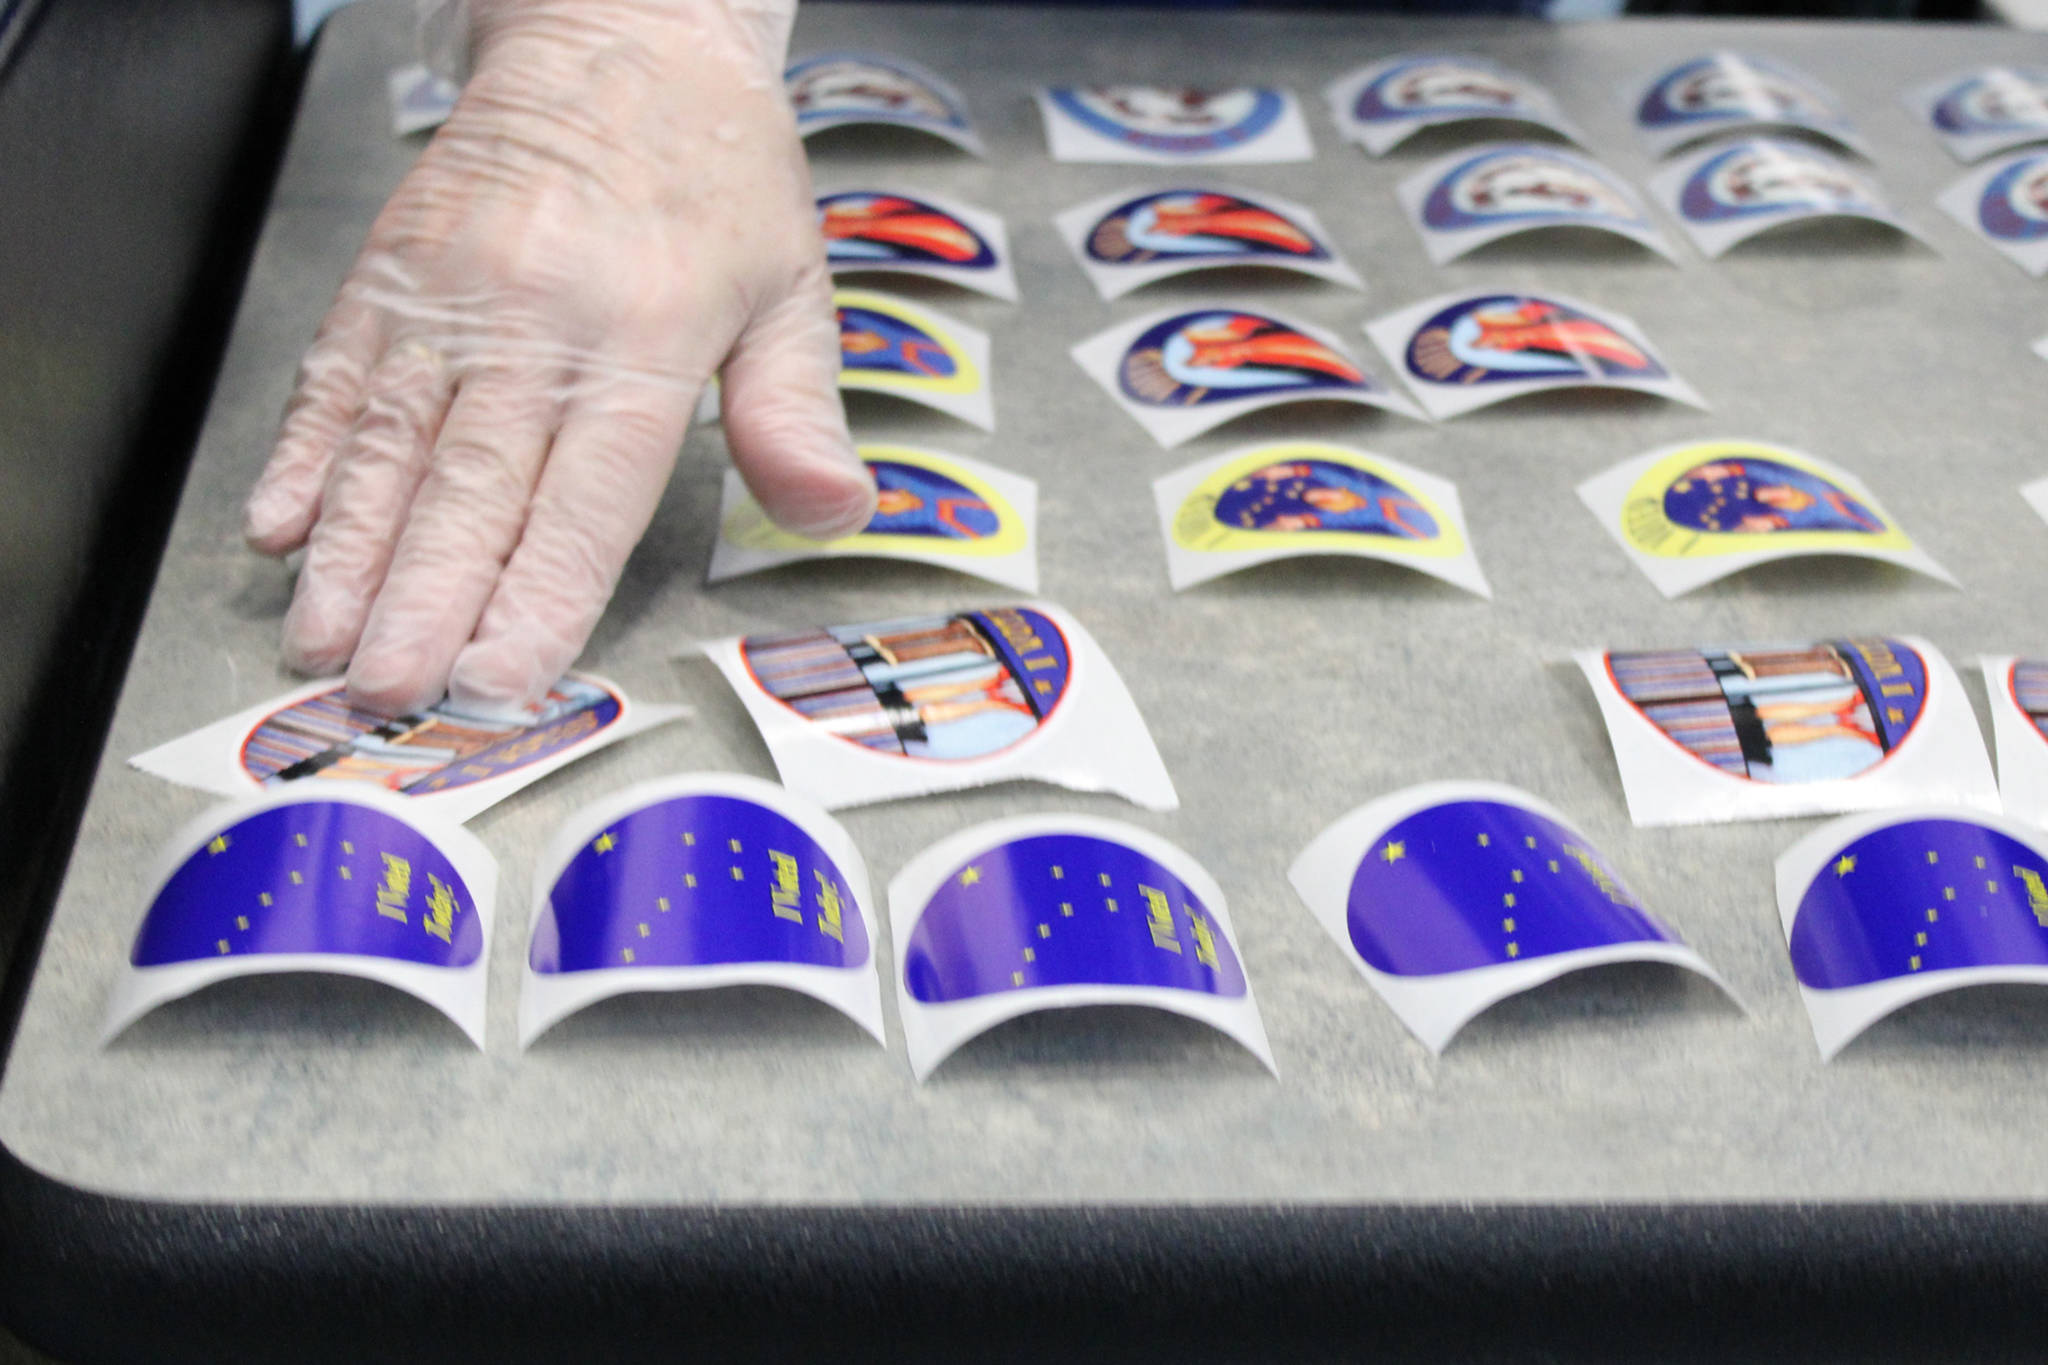 An election official lays out more “I voted” stickers on Tuesday, Nov. 3. Stickers for the 2020 general election featured designs by Alaskan artist Barbara Lavallee. Election officials in Juneau said the sticker depicting a pair of Neoprene boots ha been particularly popular. (Ben Hohenstatt / Juneau Empire)